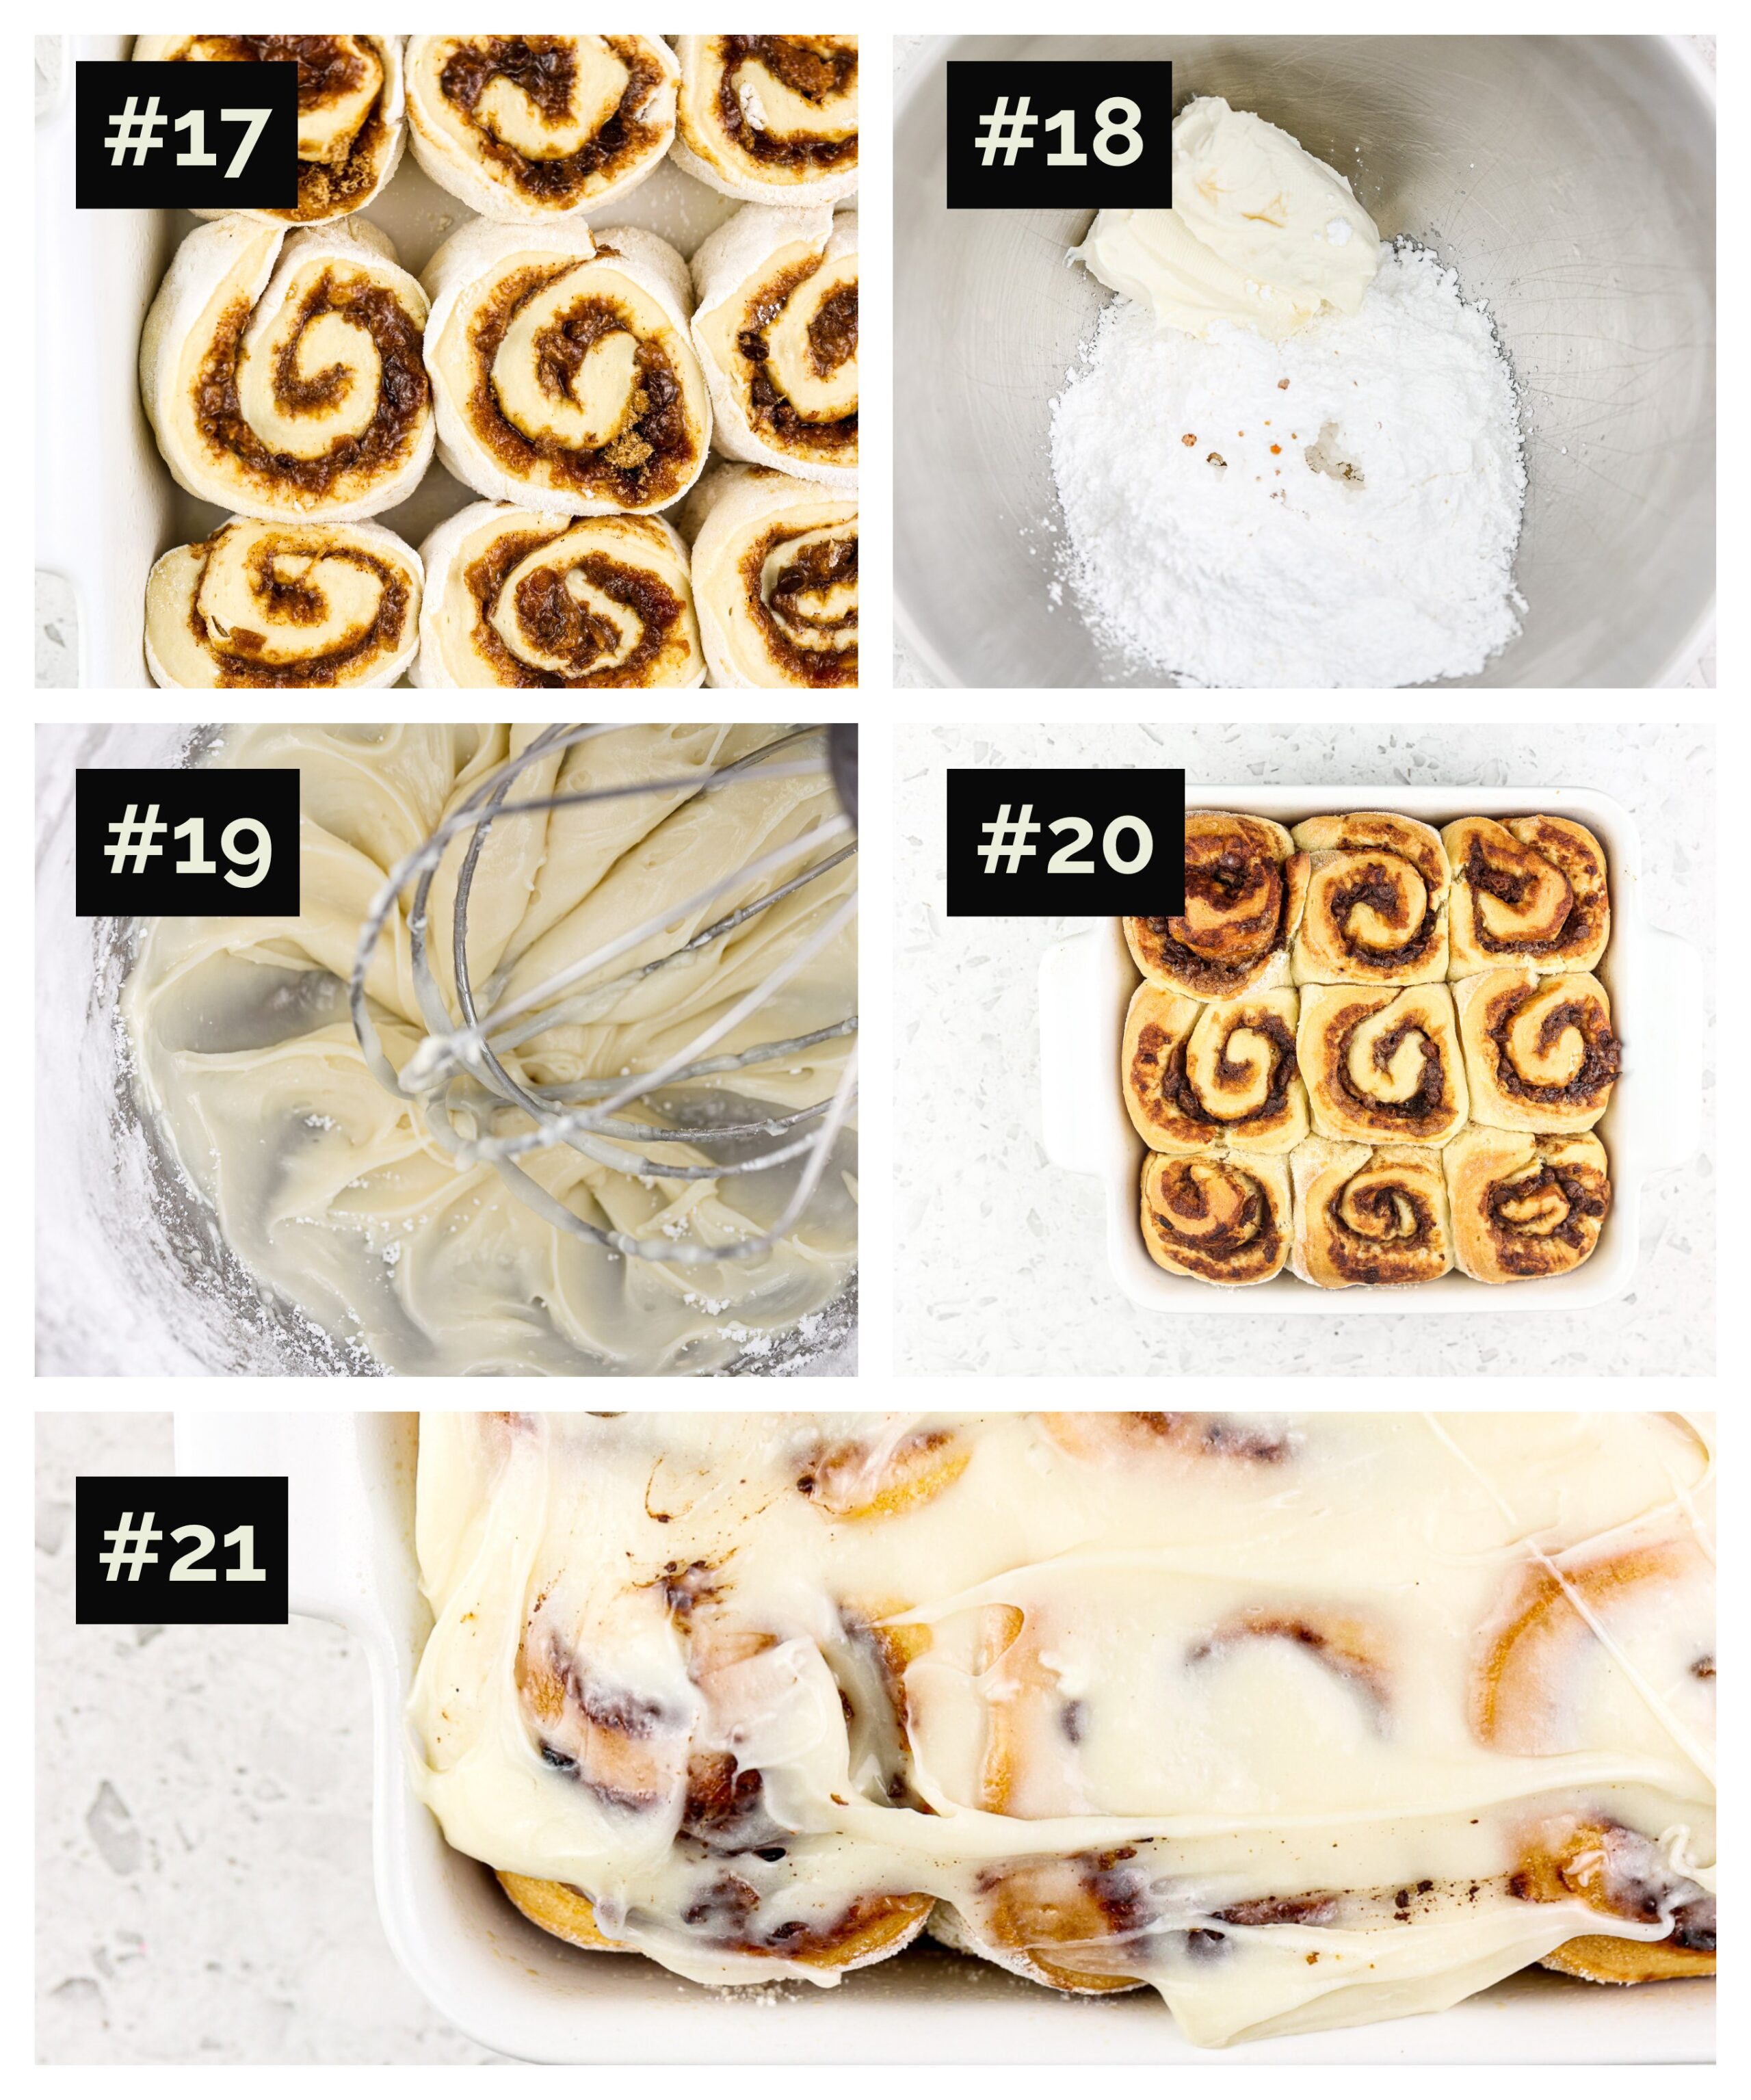 Final 5 steps in a collage format showing how to slice dough, make cream cheese white frosting in a grey stand mixer, and frost baked rolls. 